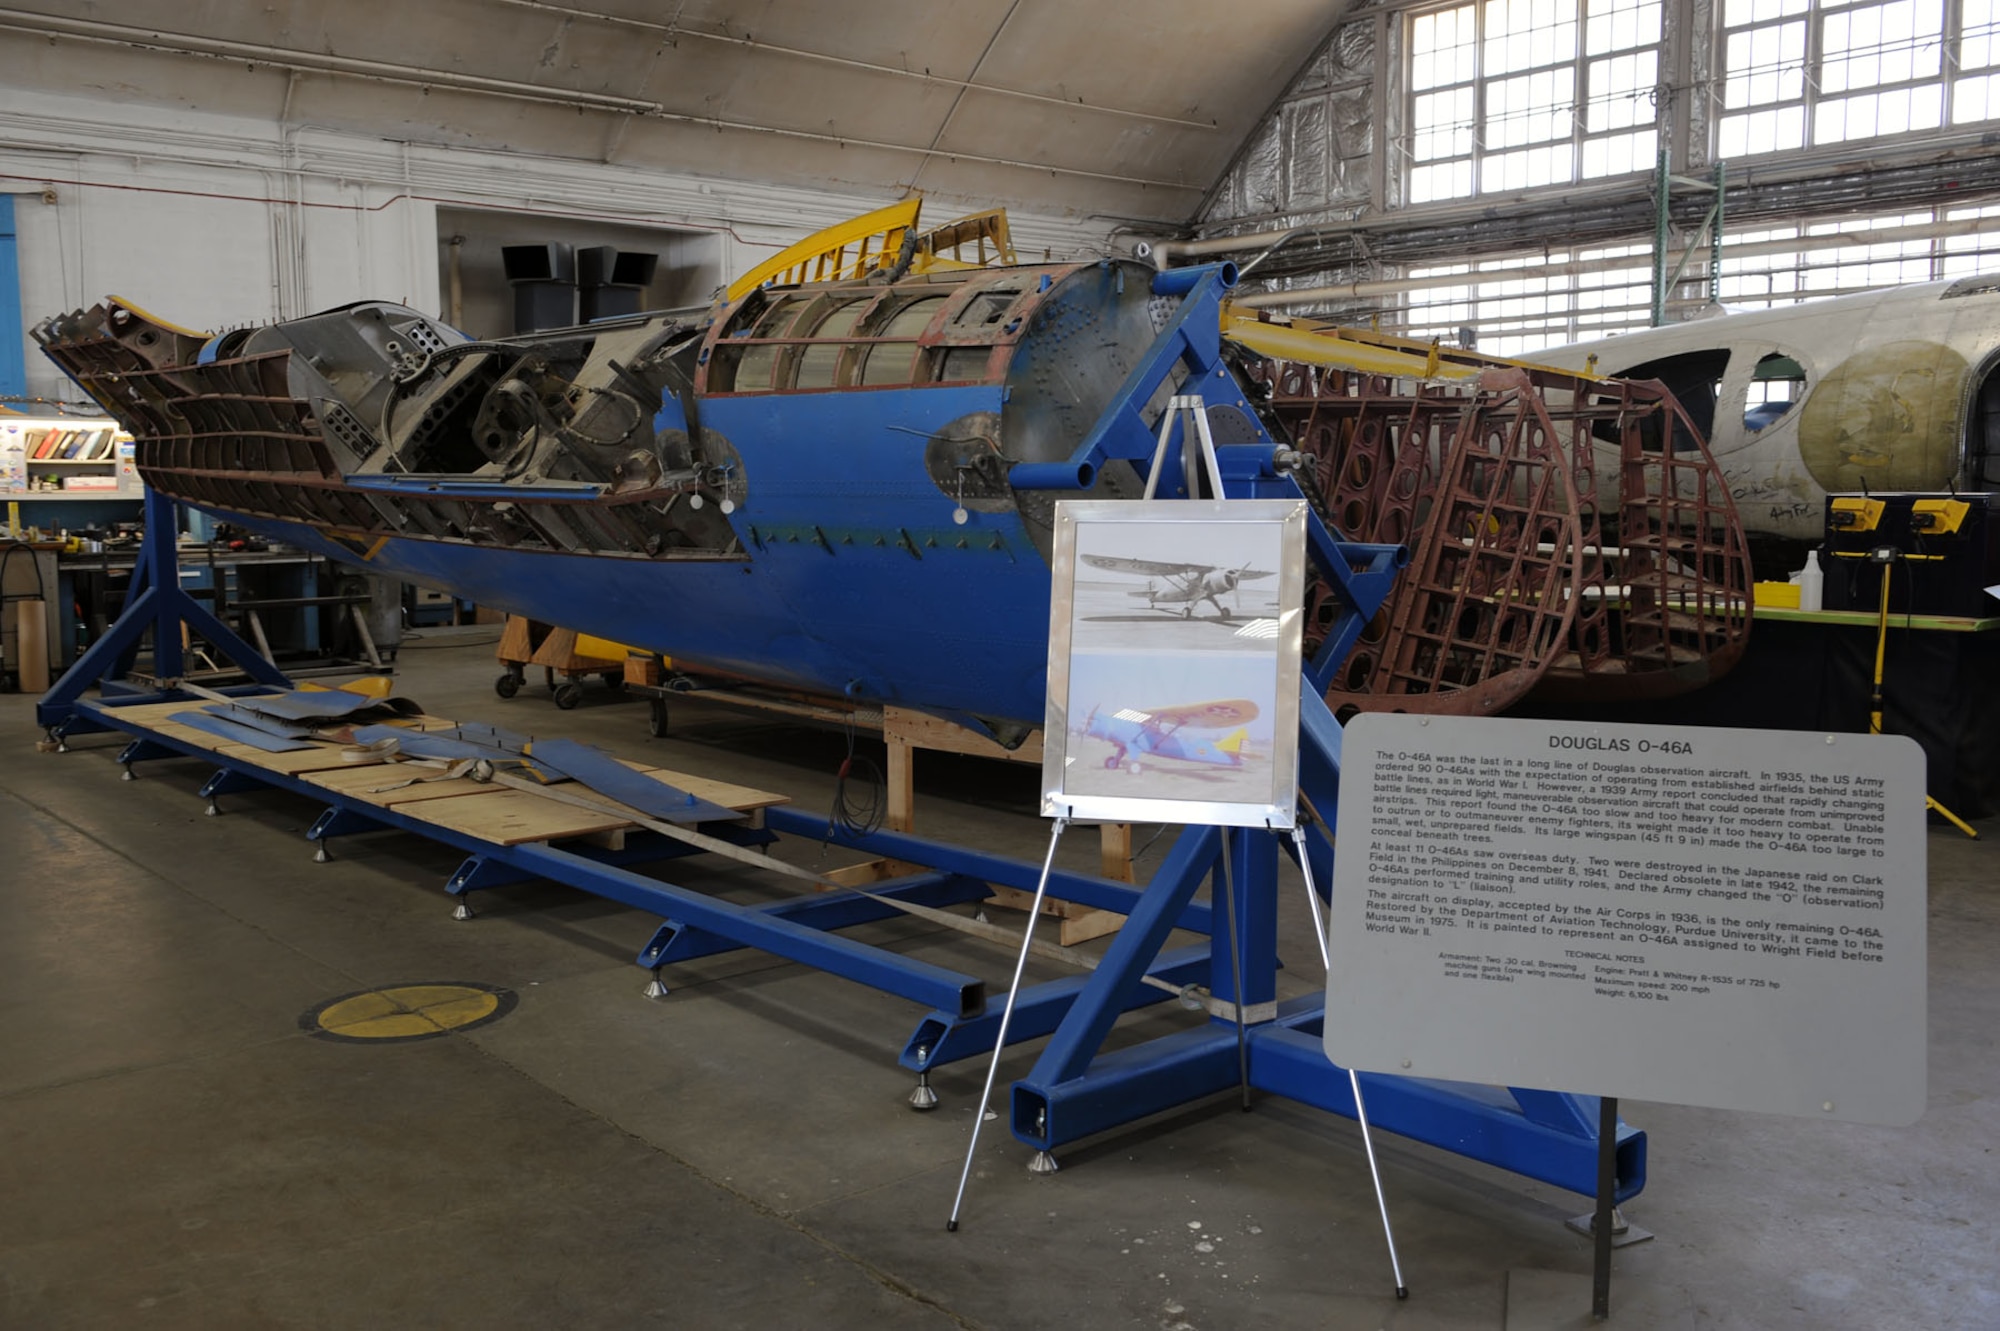 DAYTON, Ohio (04/2010) -- O-46A in the Restoration Hangar at the National Museum of the U.S. Air Force. (U.S. Air Force photo/Master Sgt. William Greer)